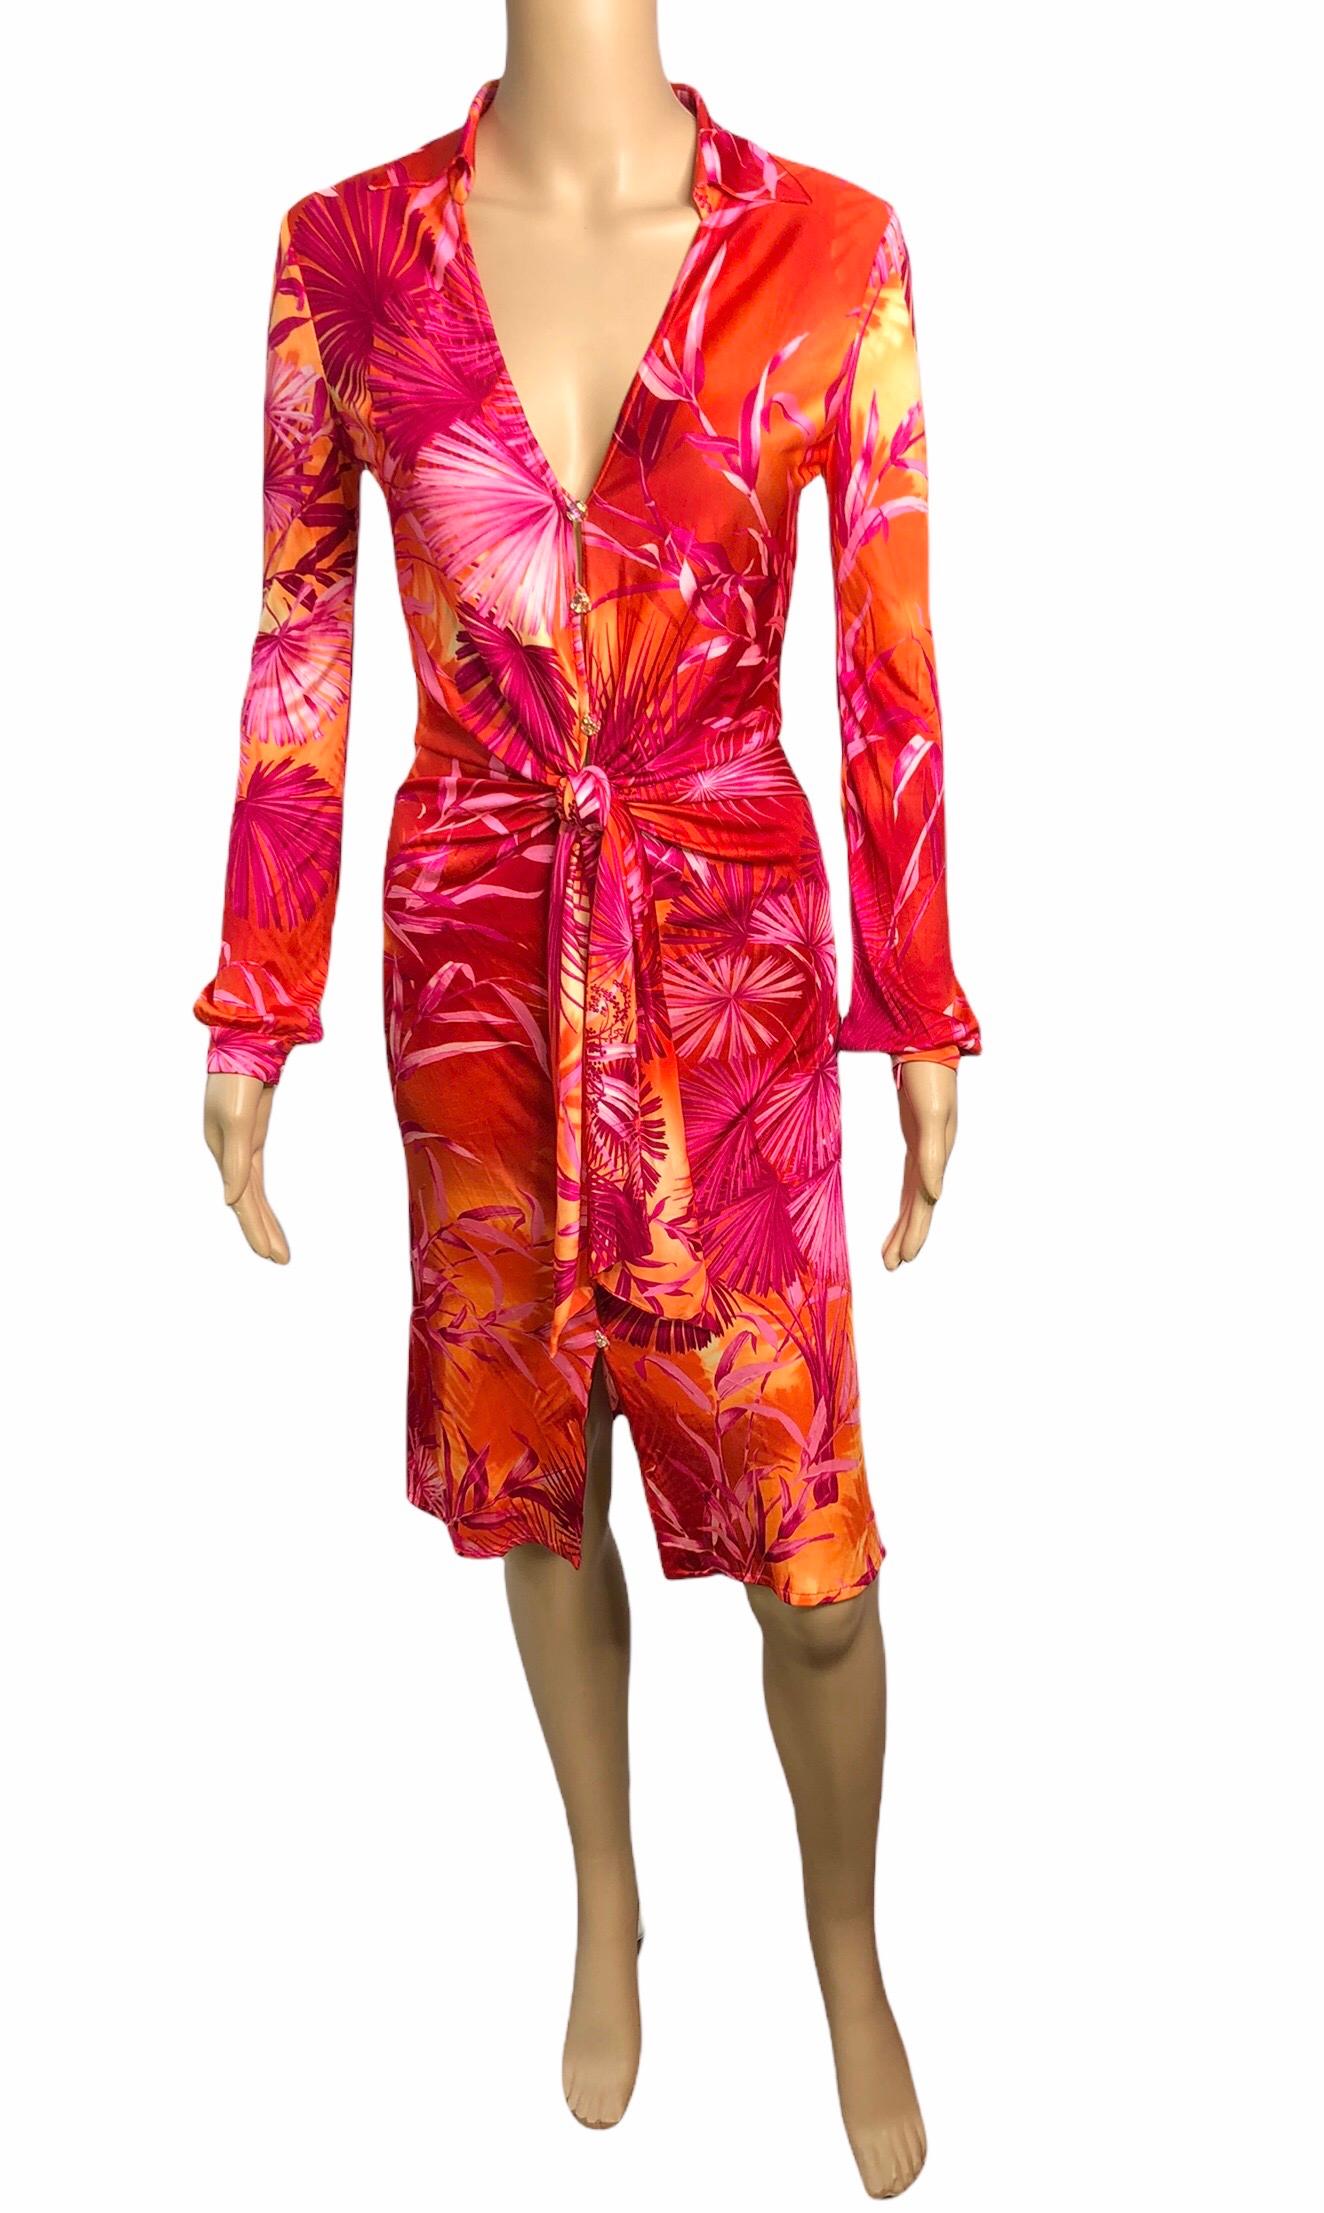 Red Gianni Versace Runway S/S 2000 Vintage Tropical Print Plunging Neckline Dress For Sale